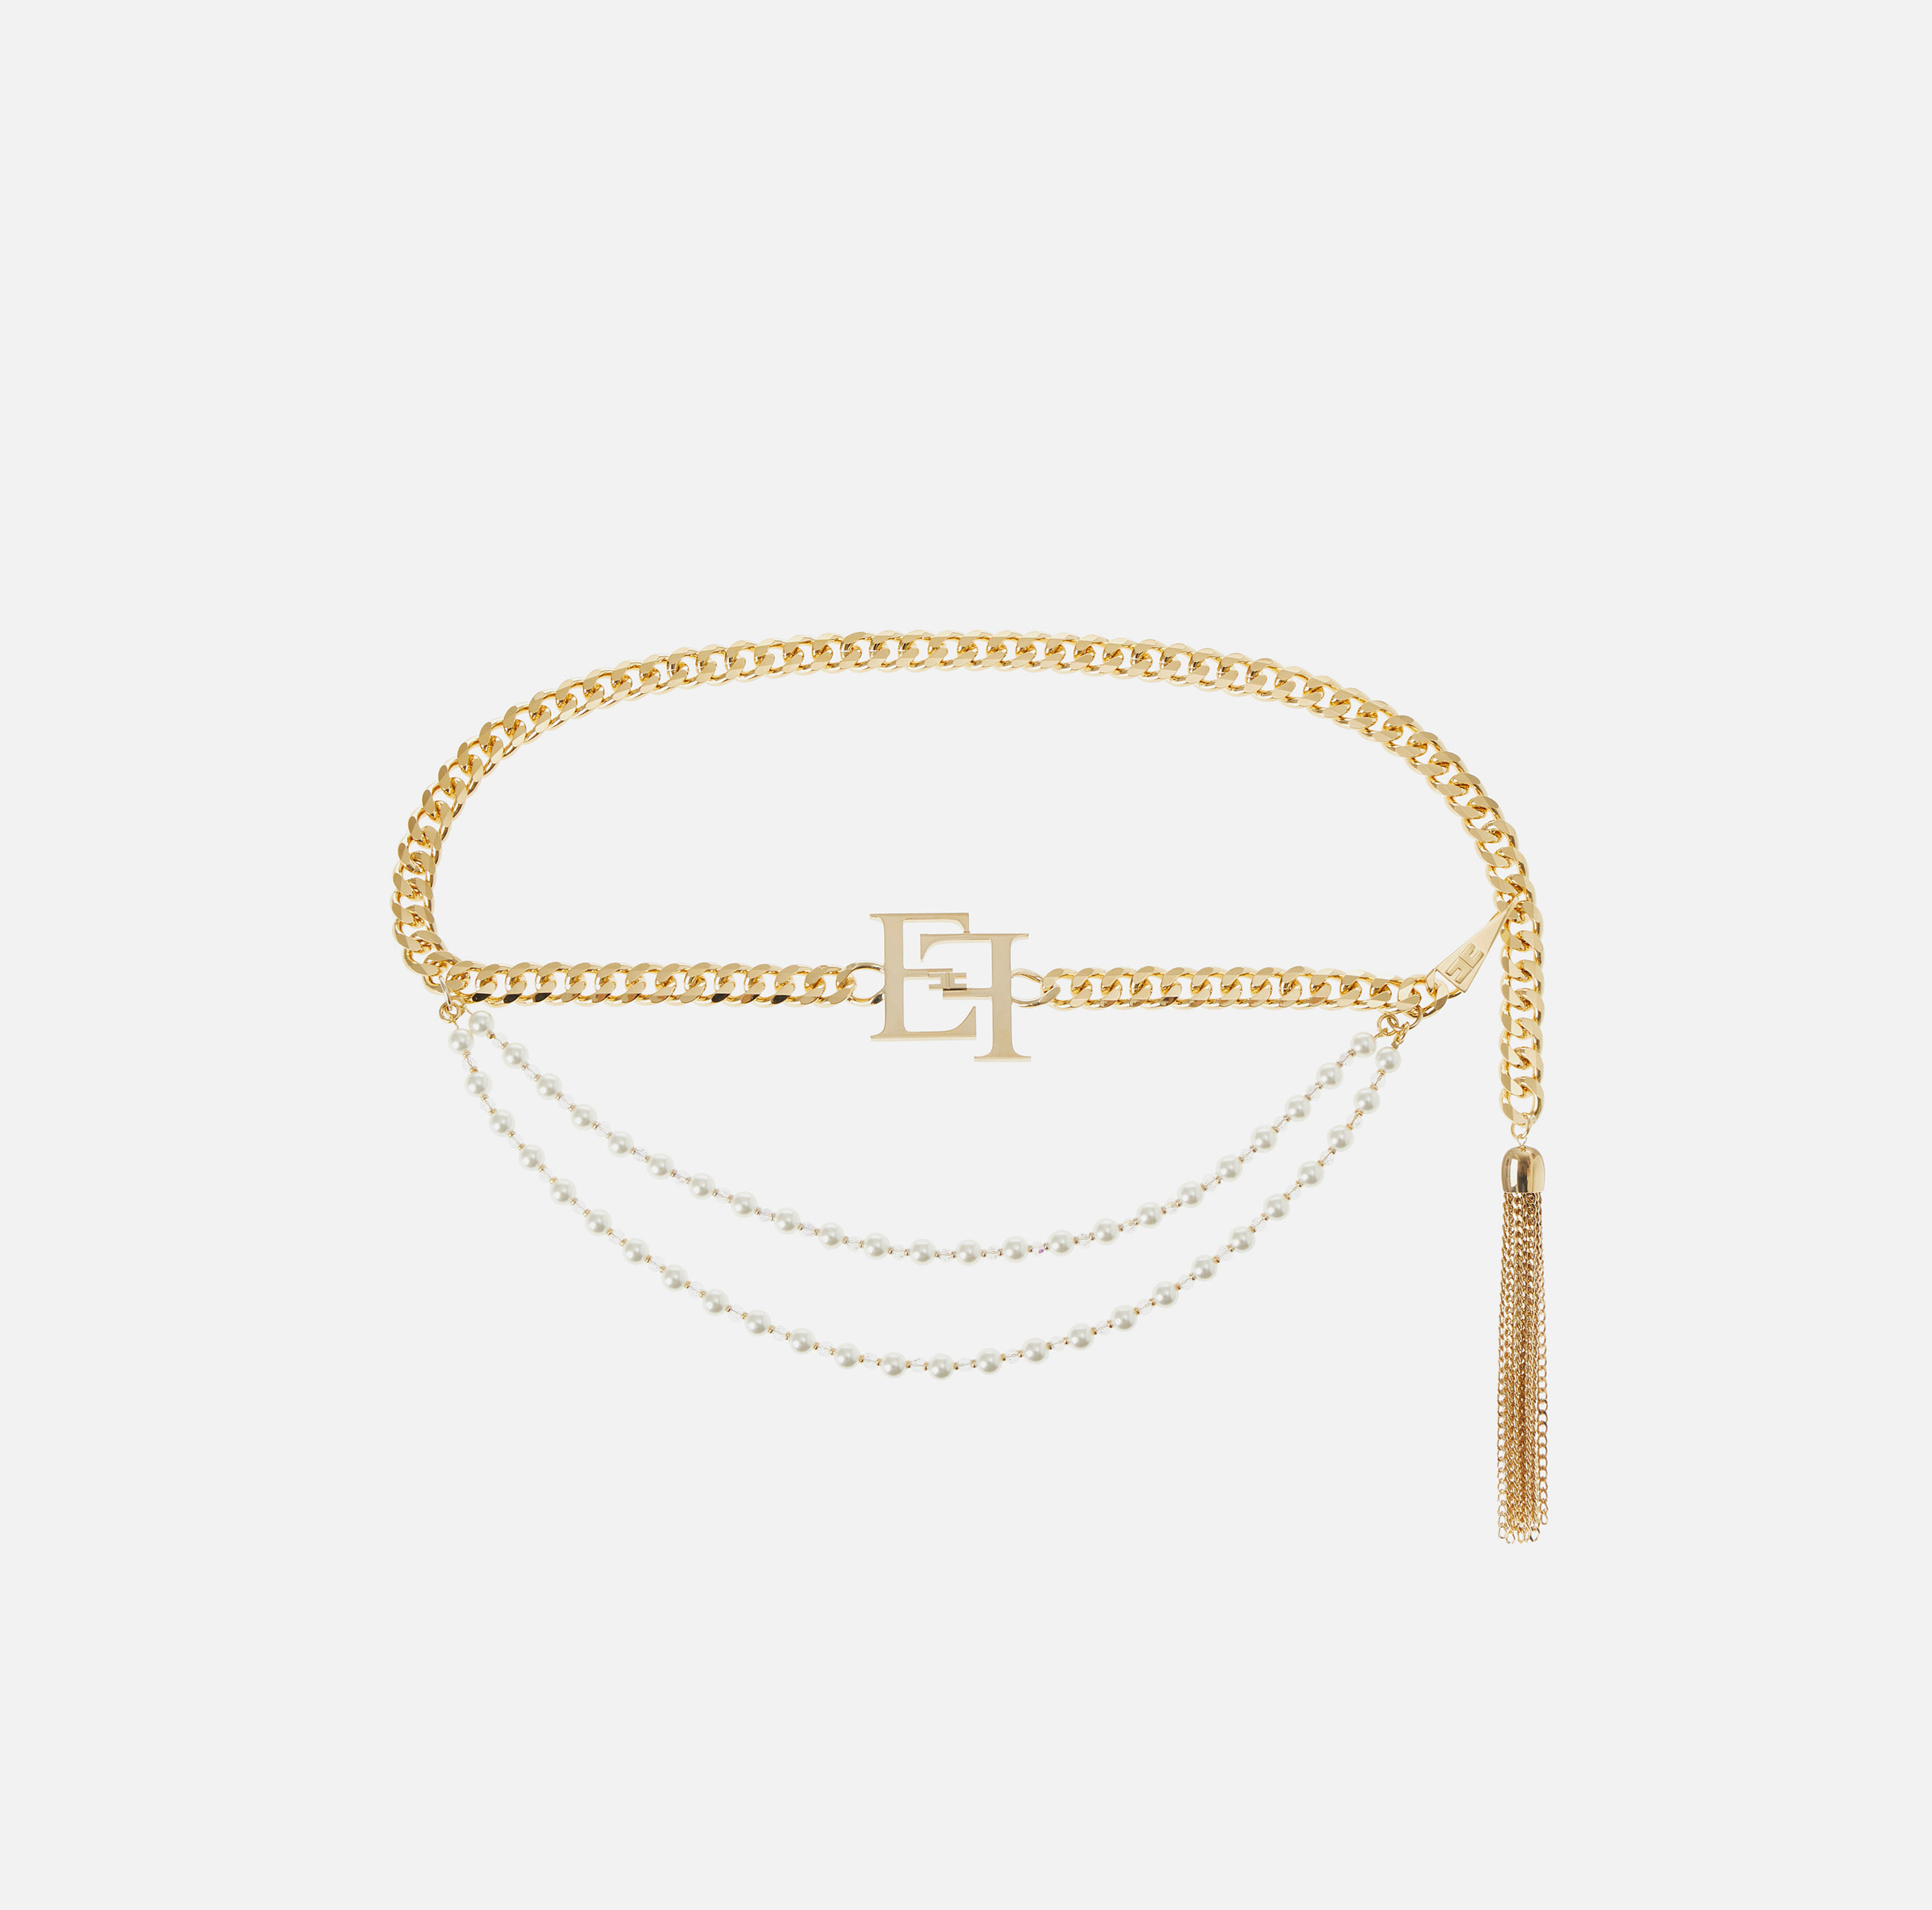 Chain belt with pearls and crystals - ACCESSORI - Elisabetta Franchi